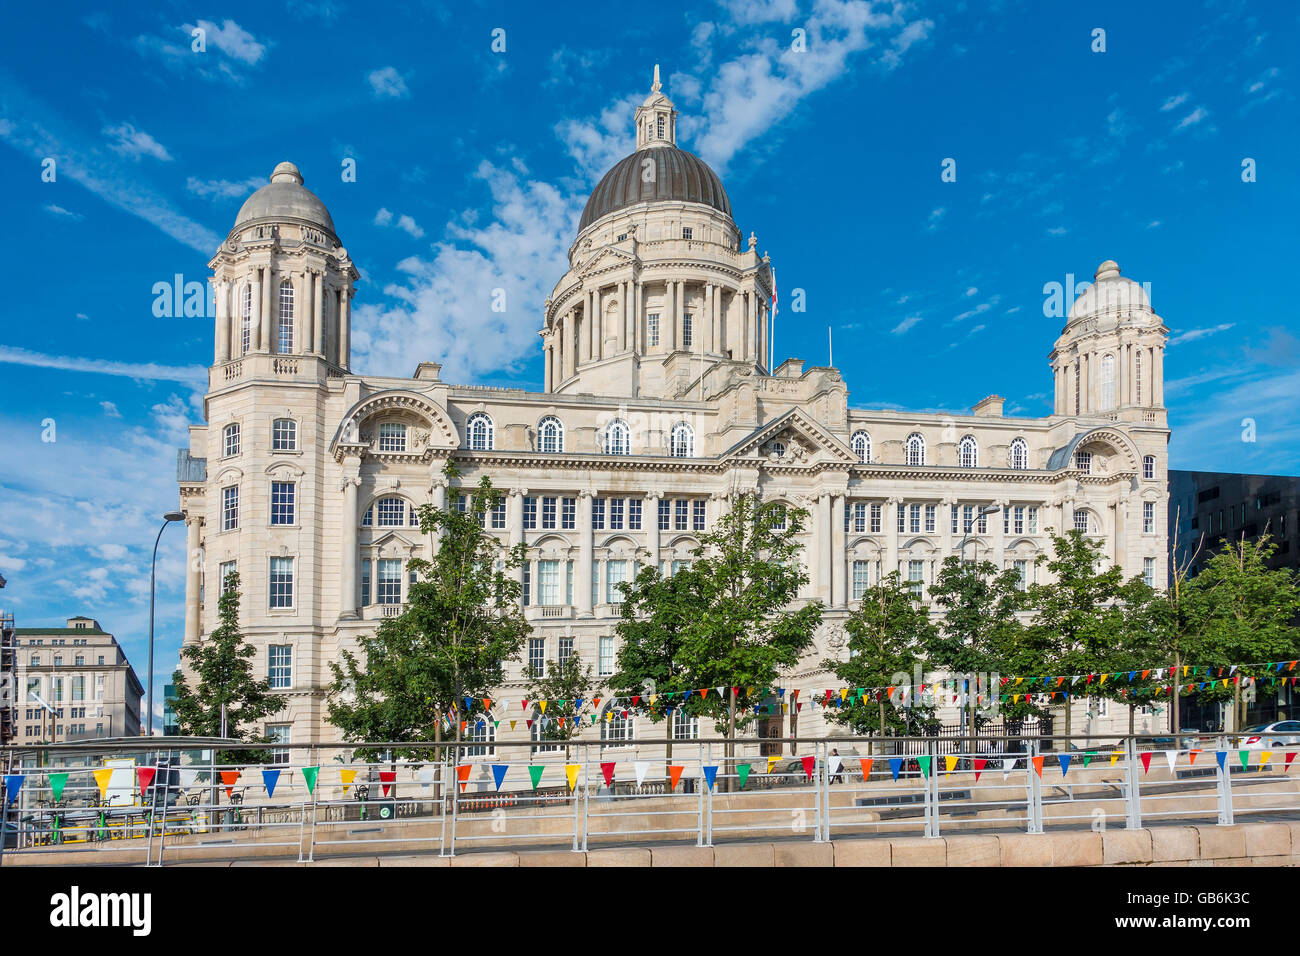 Port of Liverpool Building Pier Head Riverfront Mersey Liverpool Stock Photo